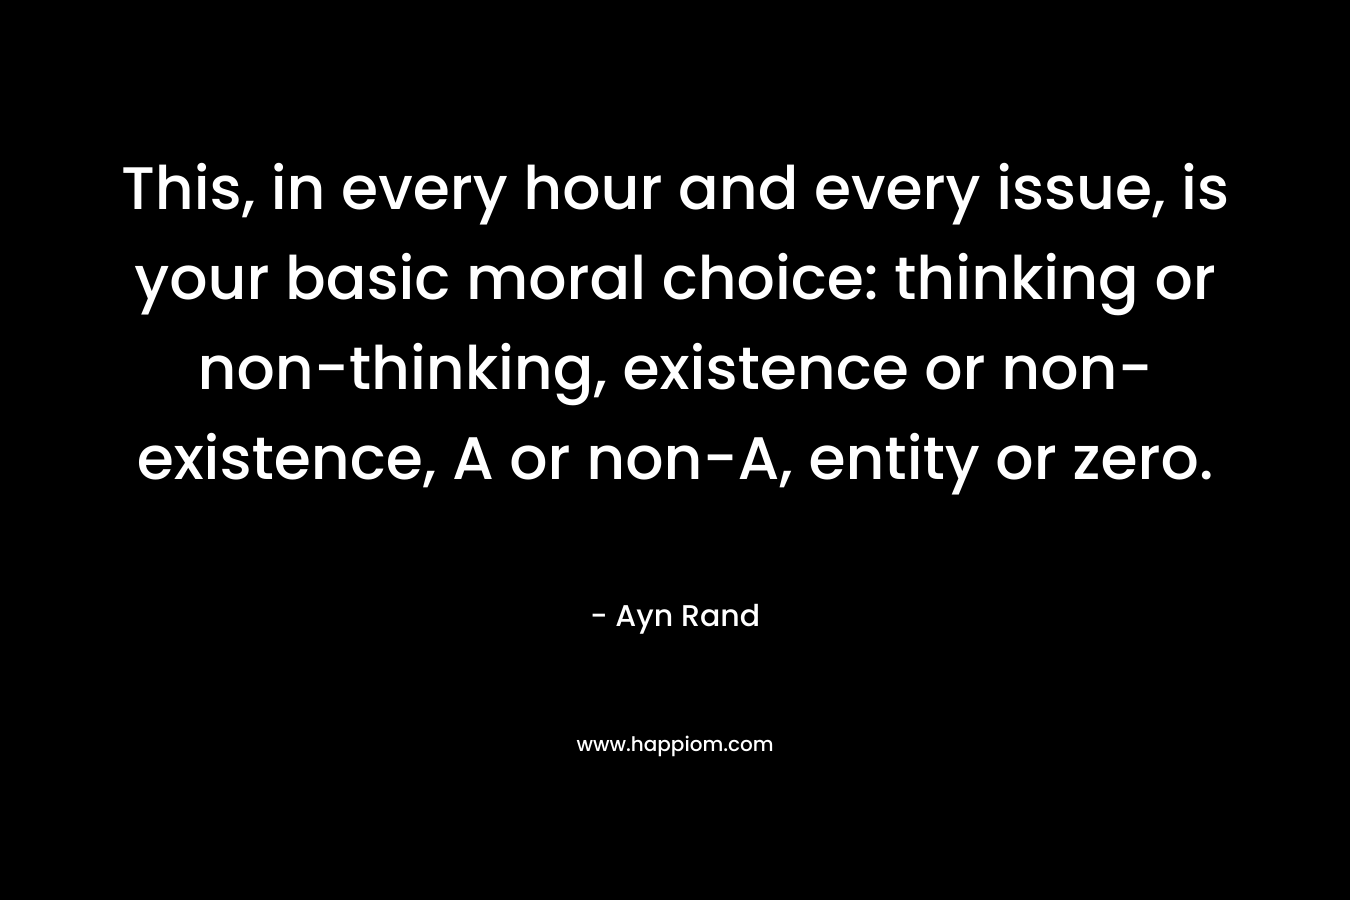 This, in every hour and every issue, is your basic moral choice: thinking or non-thinking, existence or non-existence, A or non-A, entity or zero. – Ayn Rand